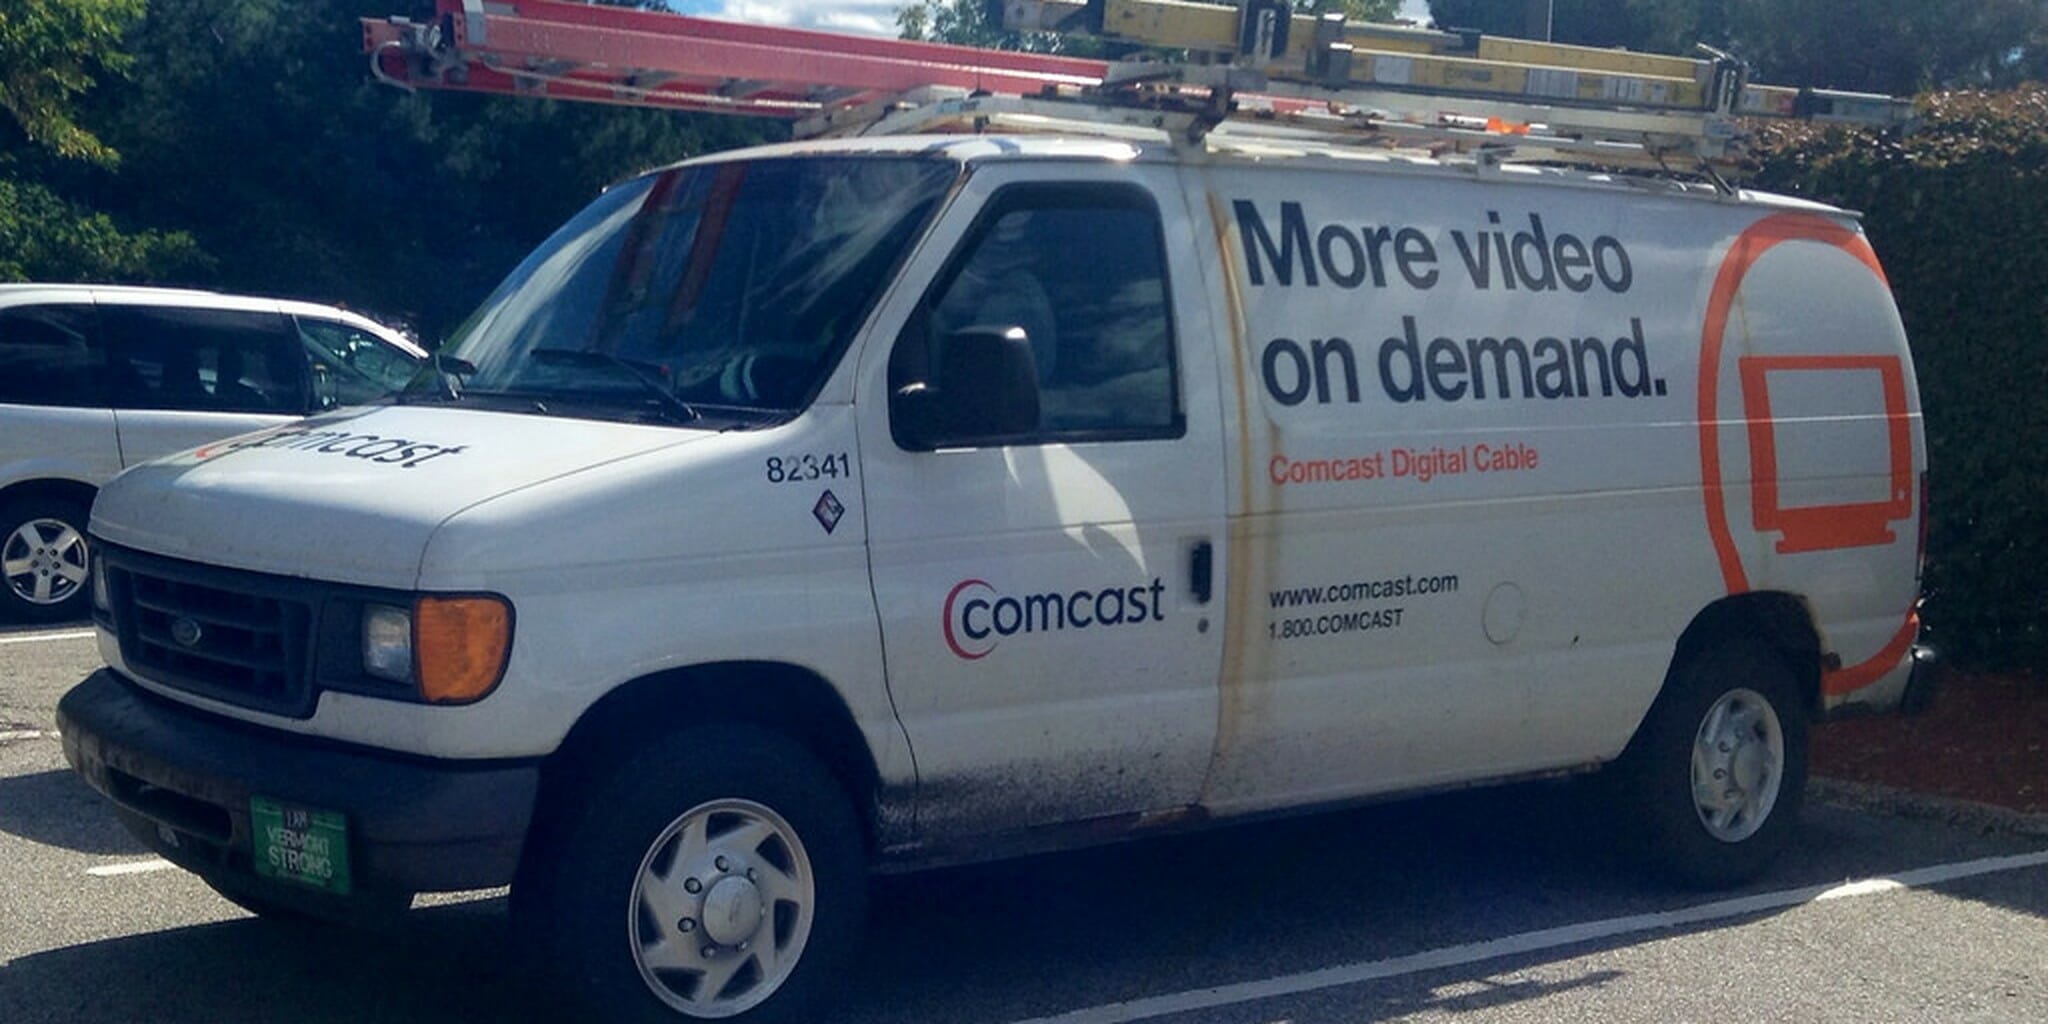 This company will cancel your Comcast account for $5